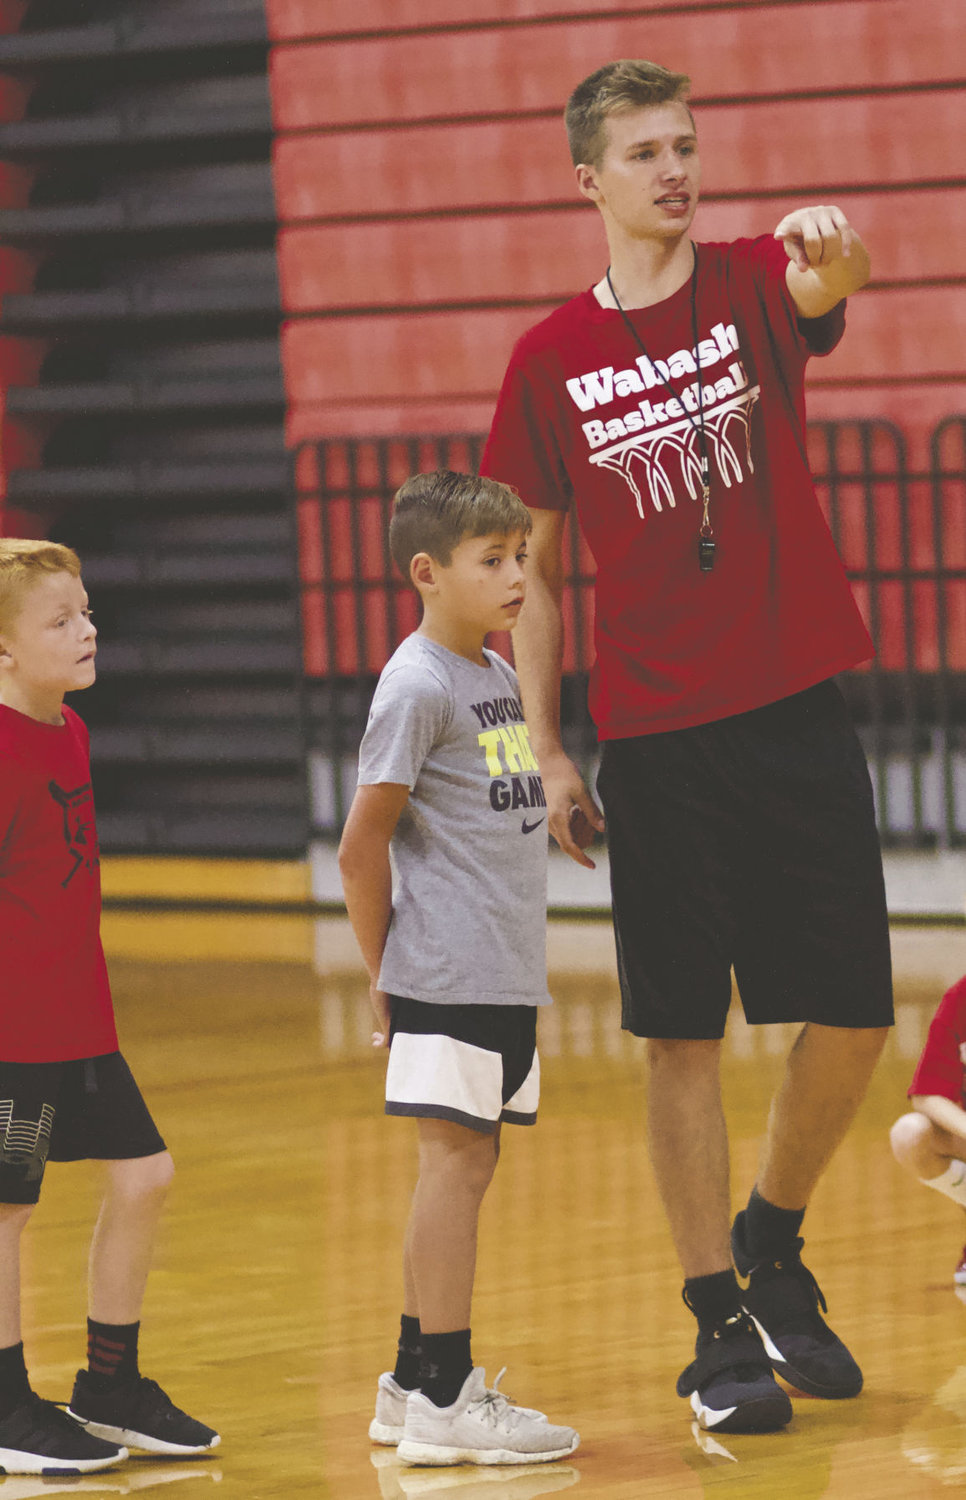 Players learn from the Wabash basketball team.